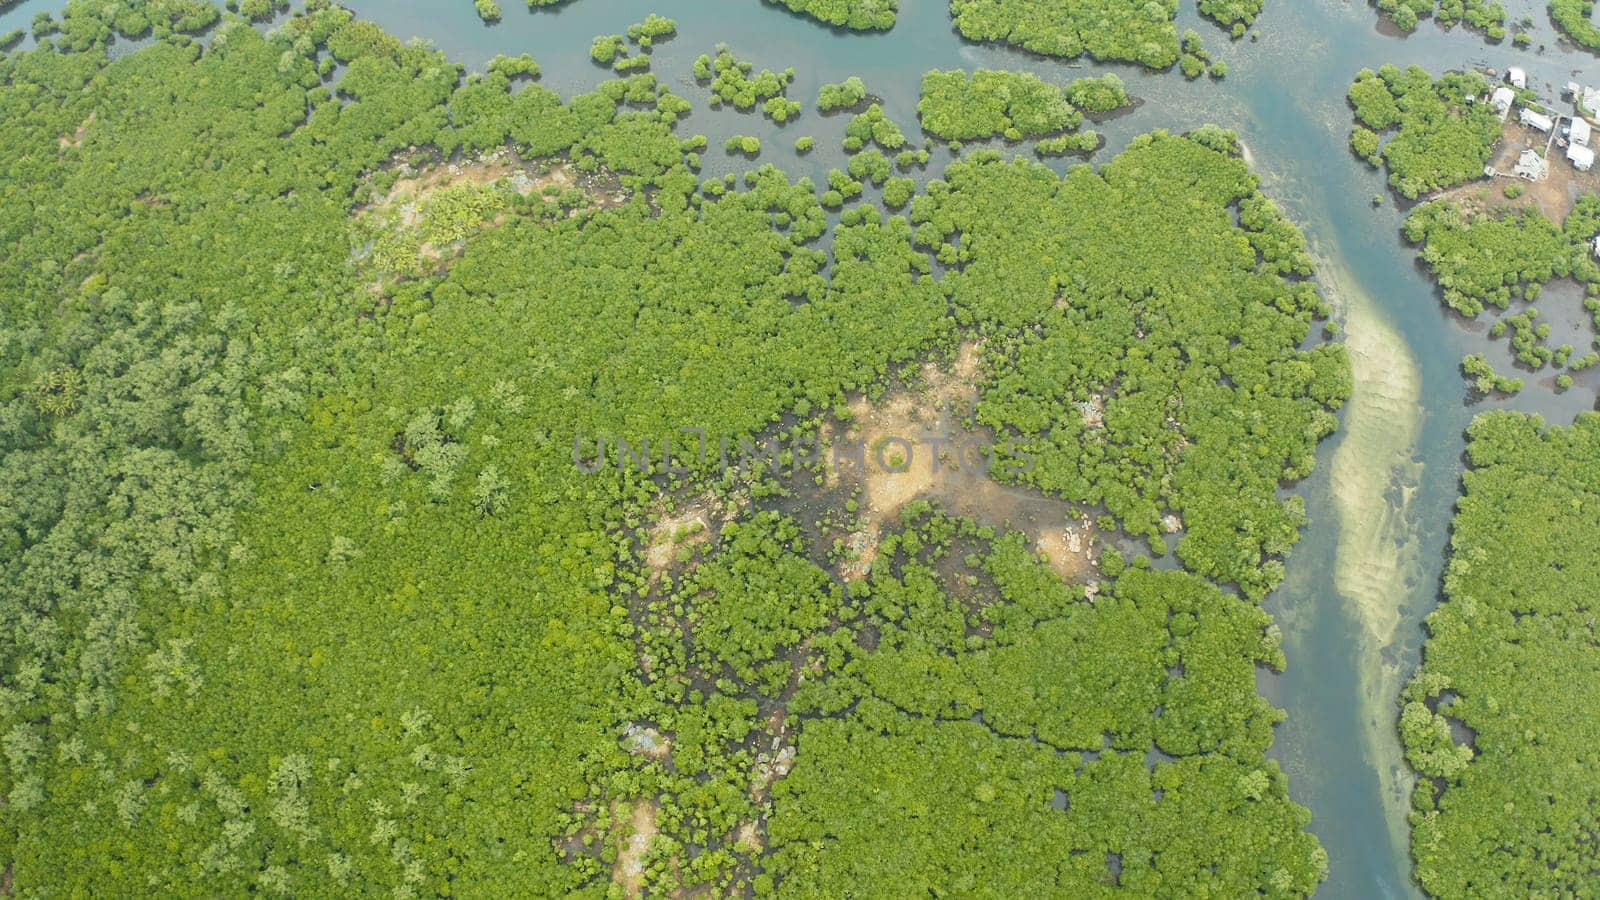 Aerial view of rivers in tropical mangrove forests. Mangrove landscape, Siargao,Philippines.